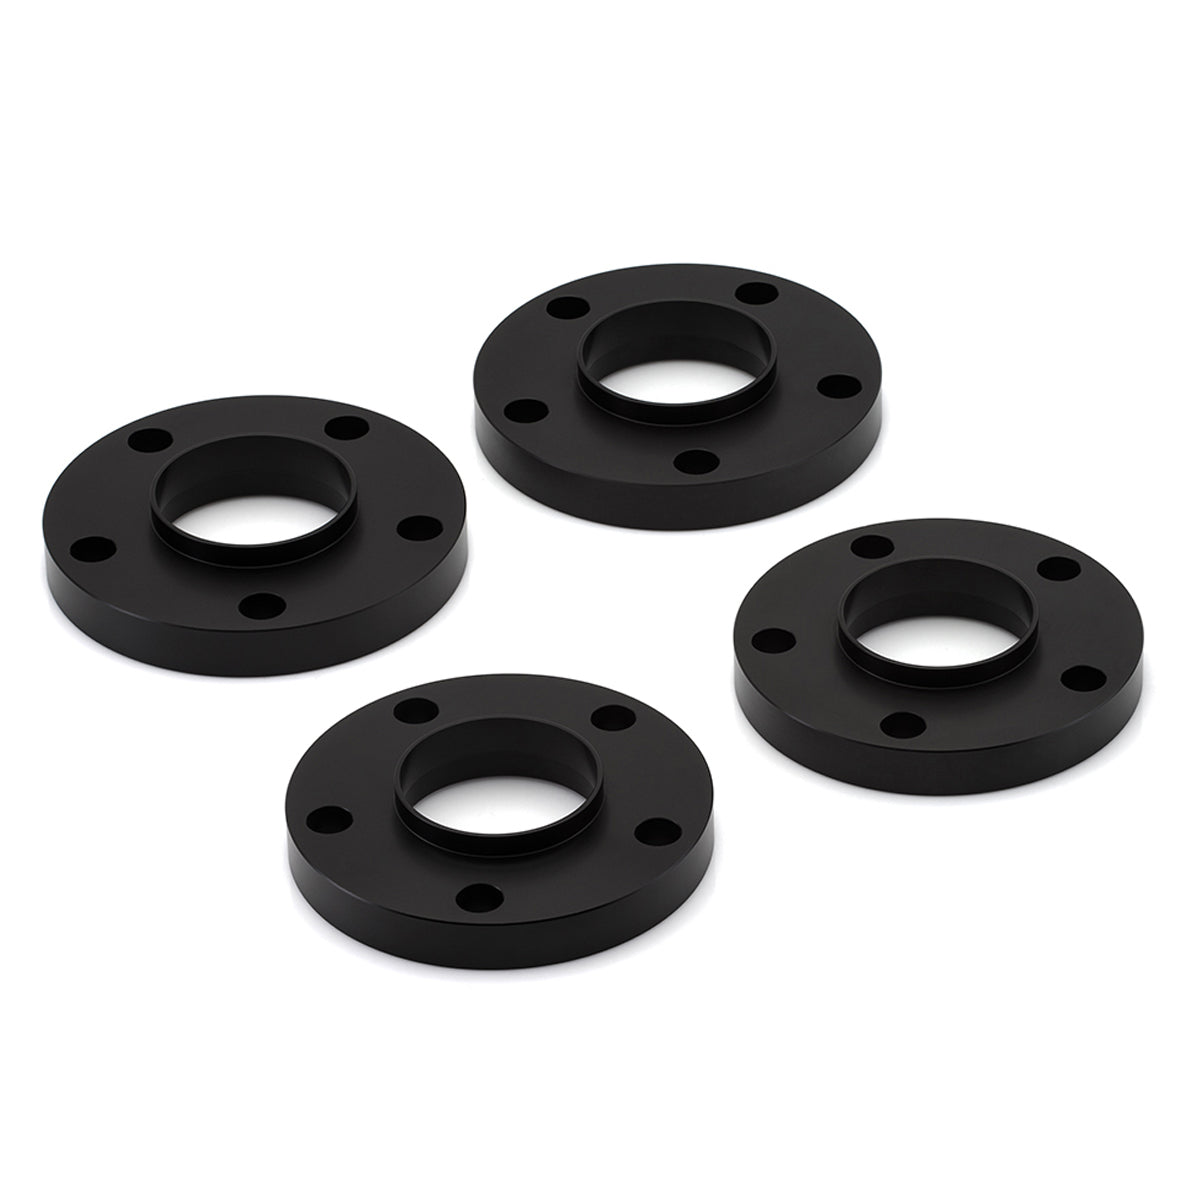 2009-2017 BMW 7 Series F01 F02 5x120 Hubcentric Wheelcentric Wheel Spacers set of 4